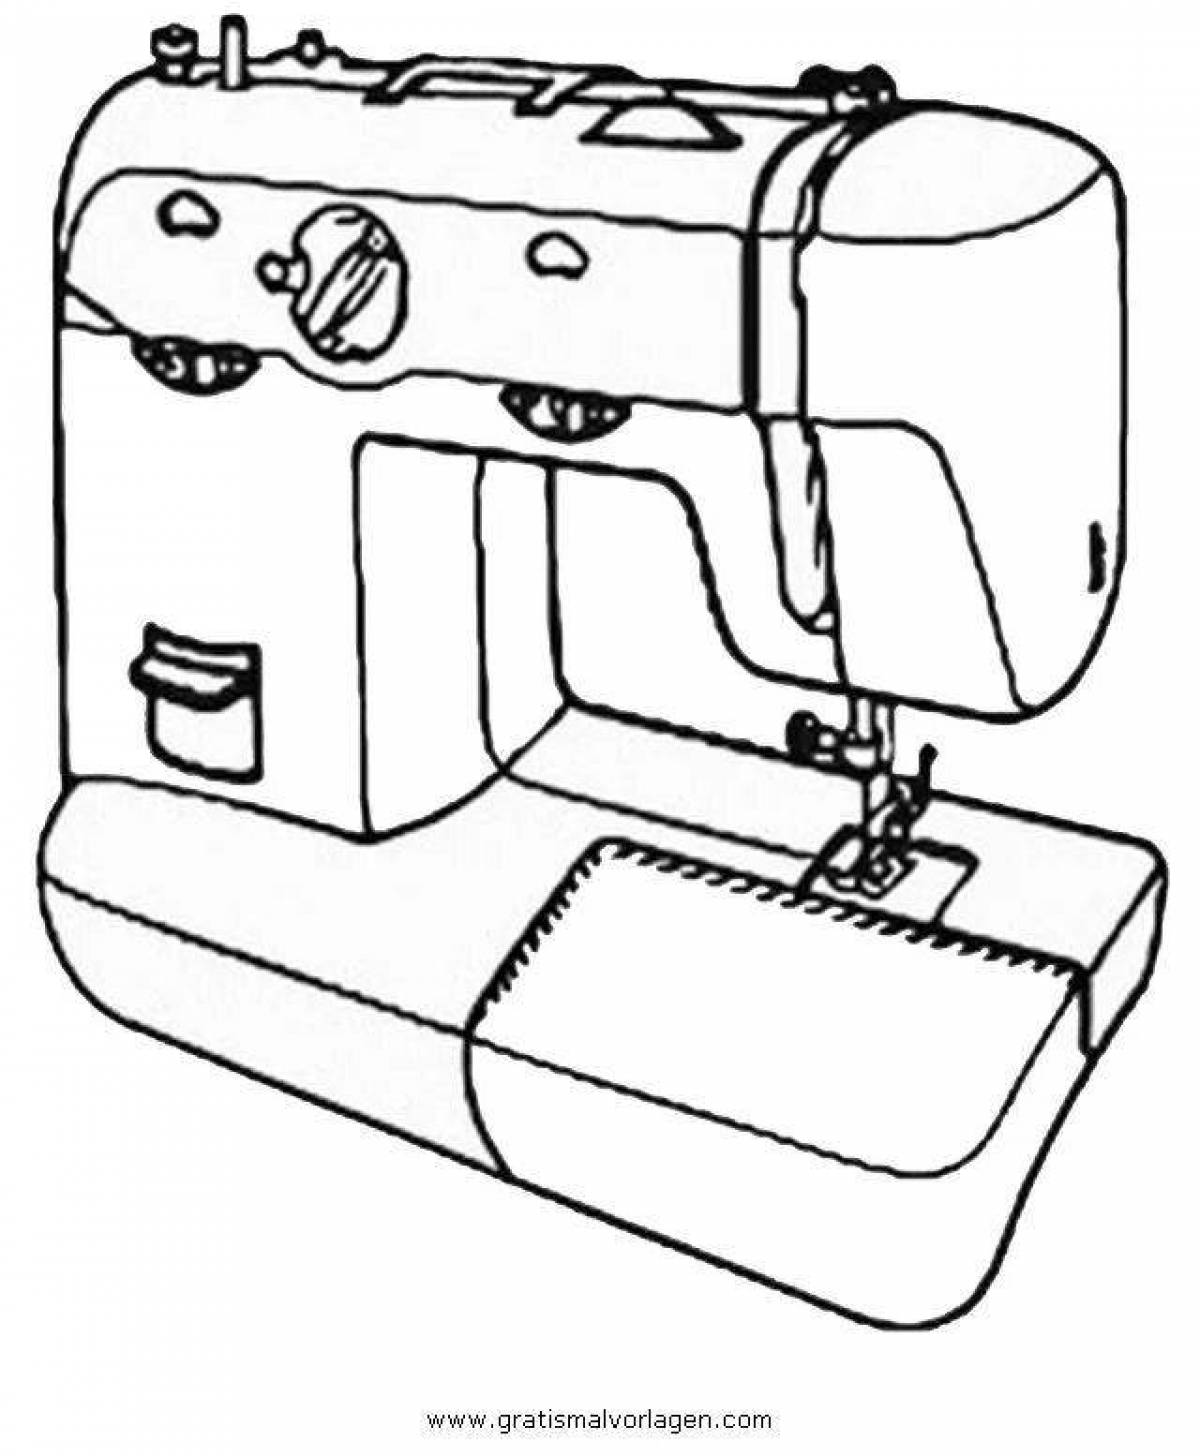 Fancy sewing machine coloring book